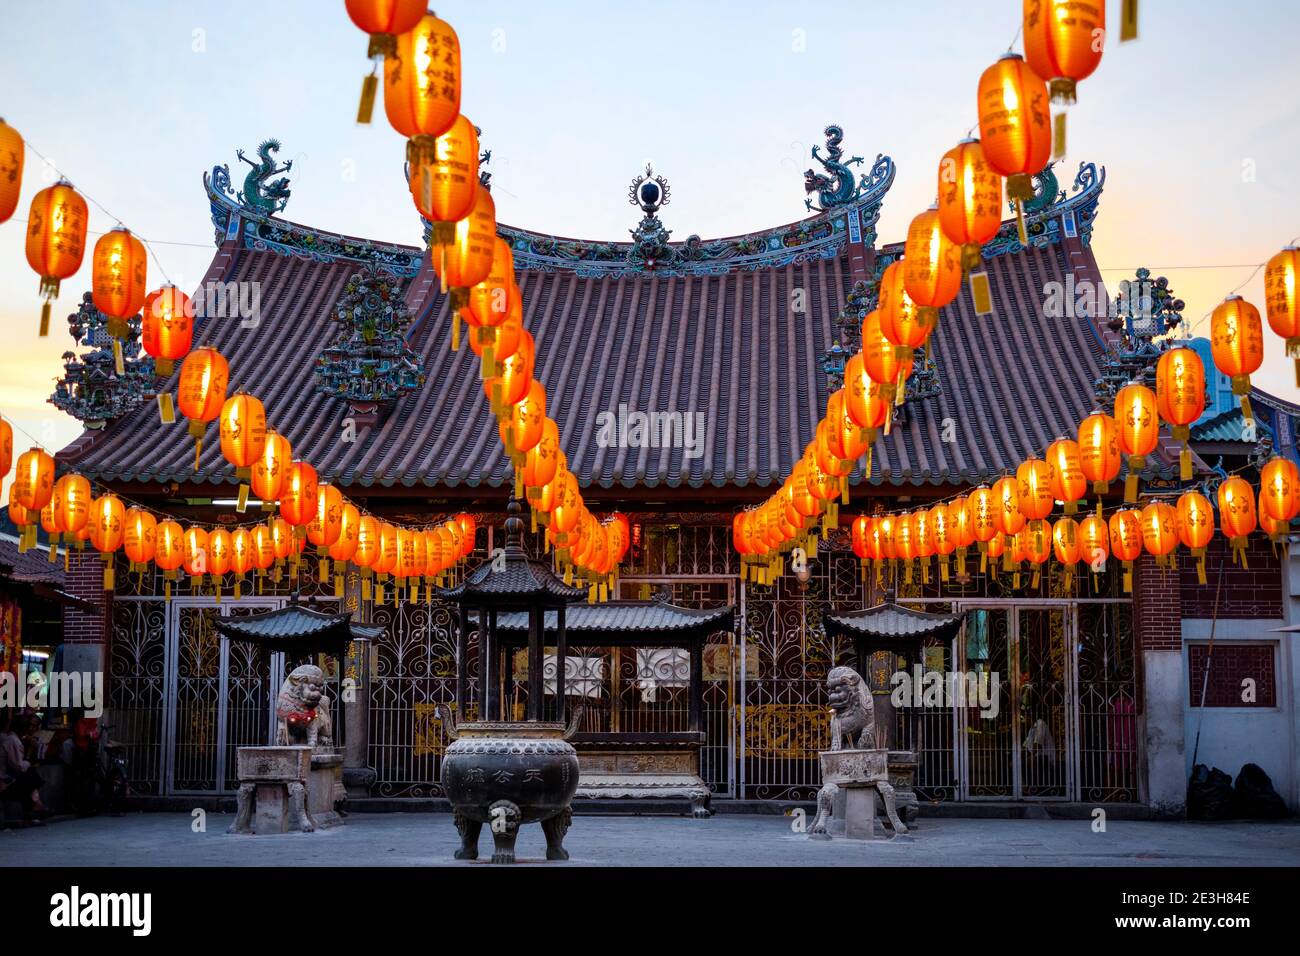 Kuan Yin Teng temple decorated with red lanterns during the Chinese (or Lunar) New Year in George Town, Penang, Malaysia. Stock Photo